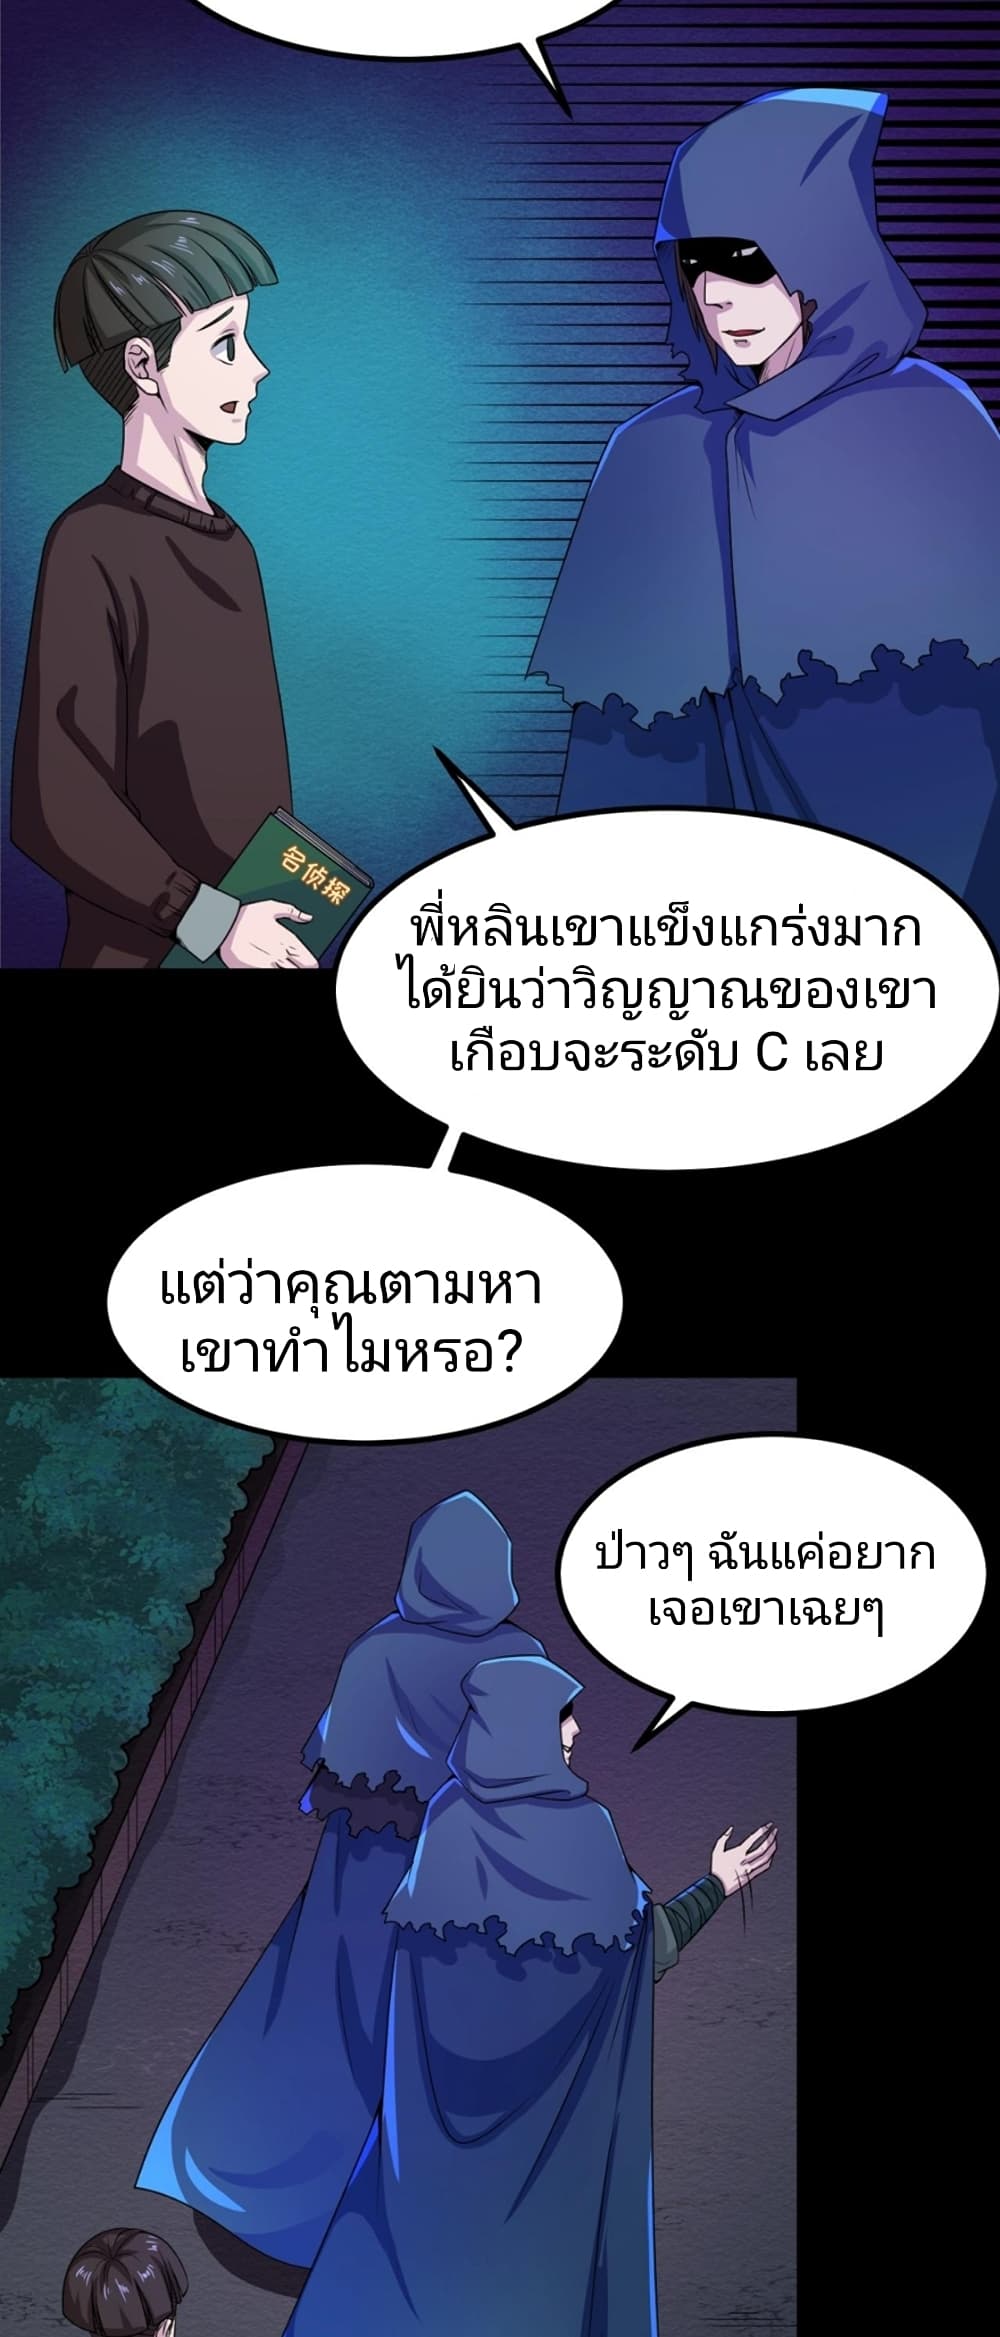 The Age of Ghost Spirits à¸à¸­à¸à¸à¸µà¹ 9 (4)